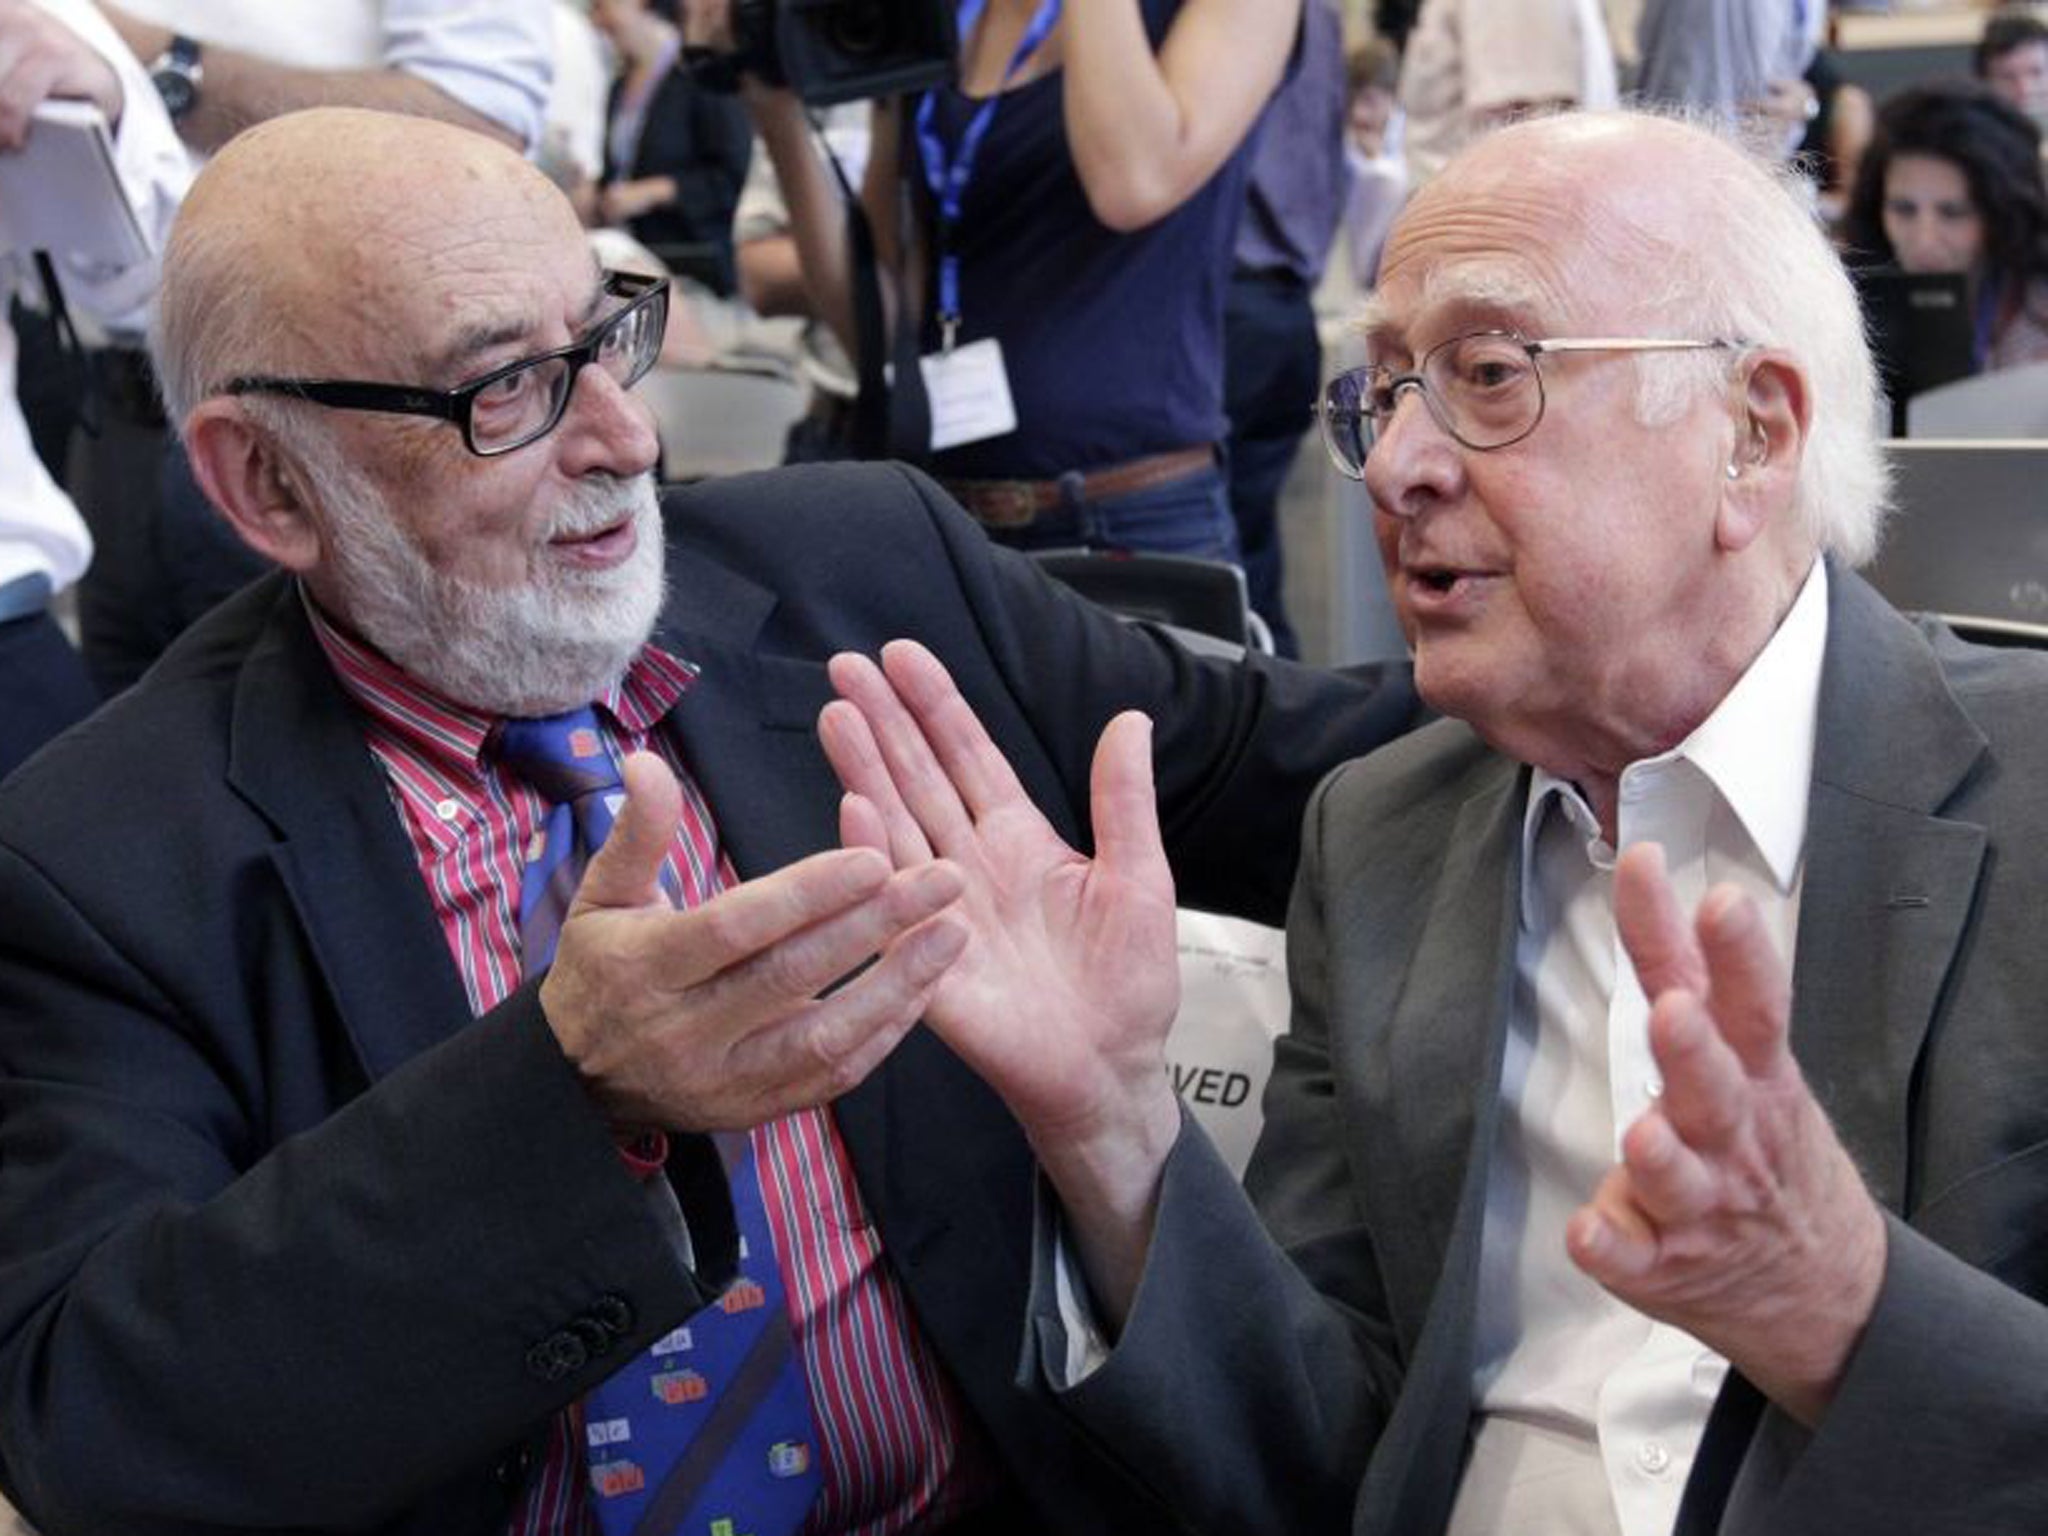 British physicist Peter Higgs with Belgium physicist Francois Englert